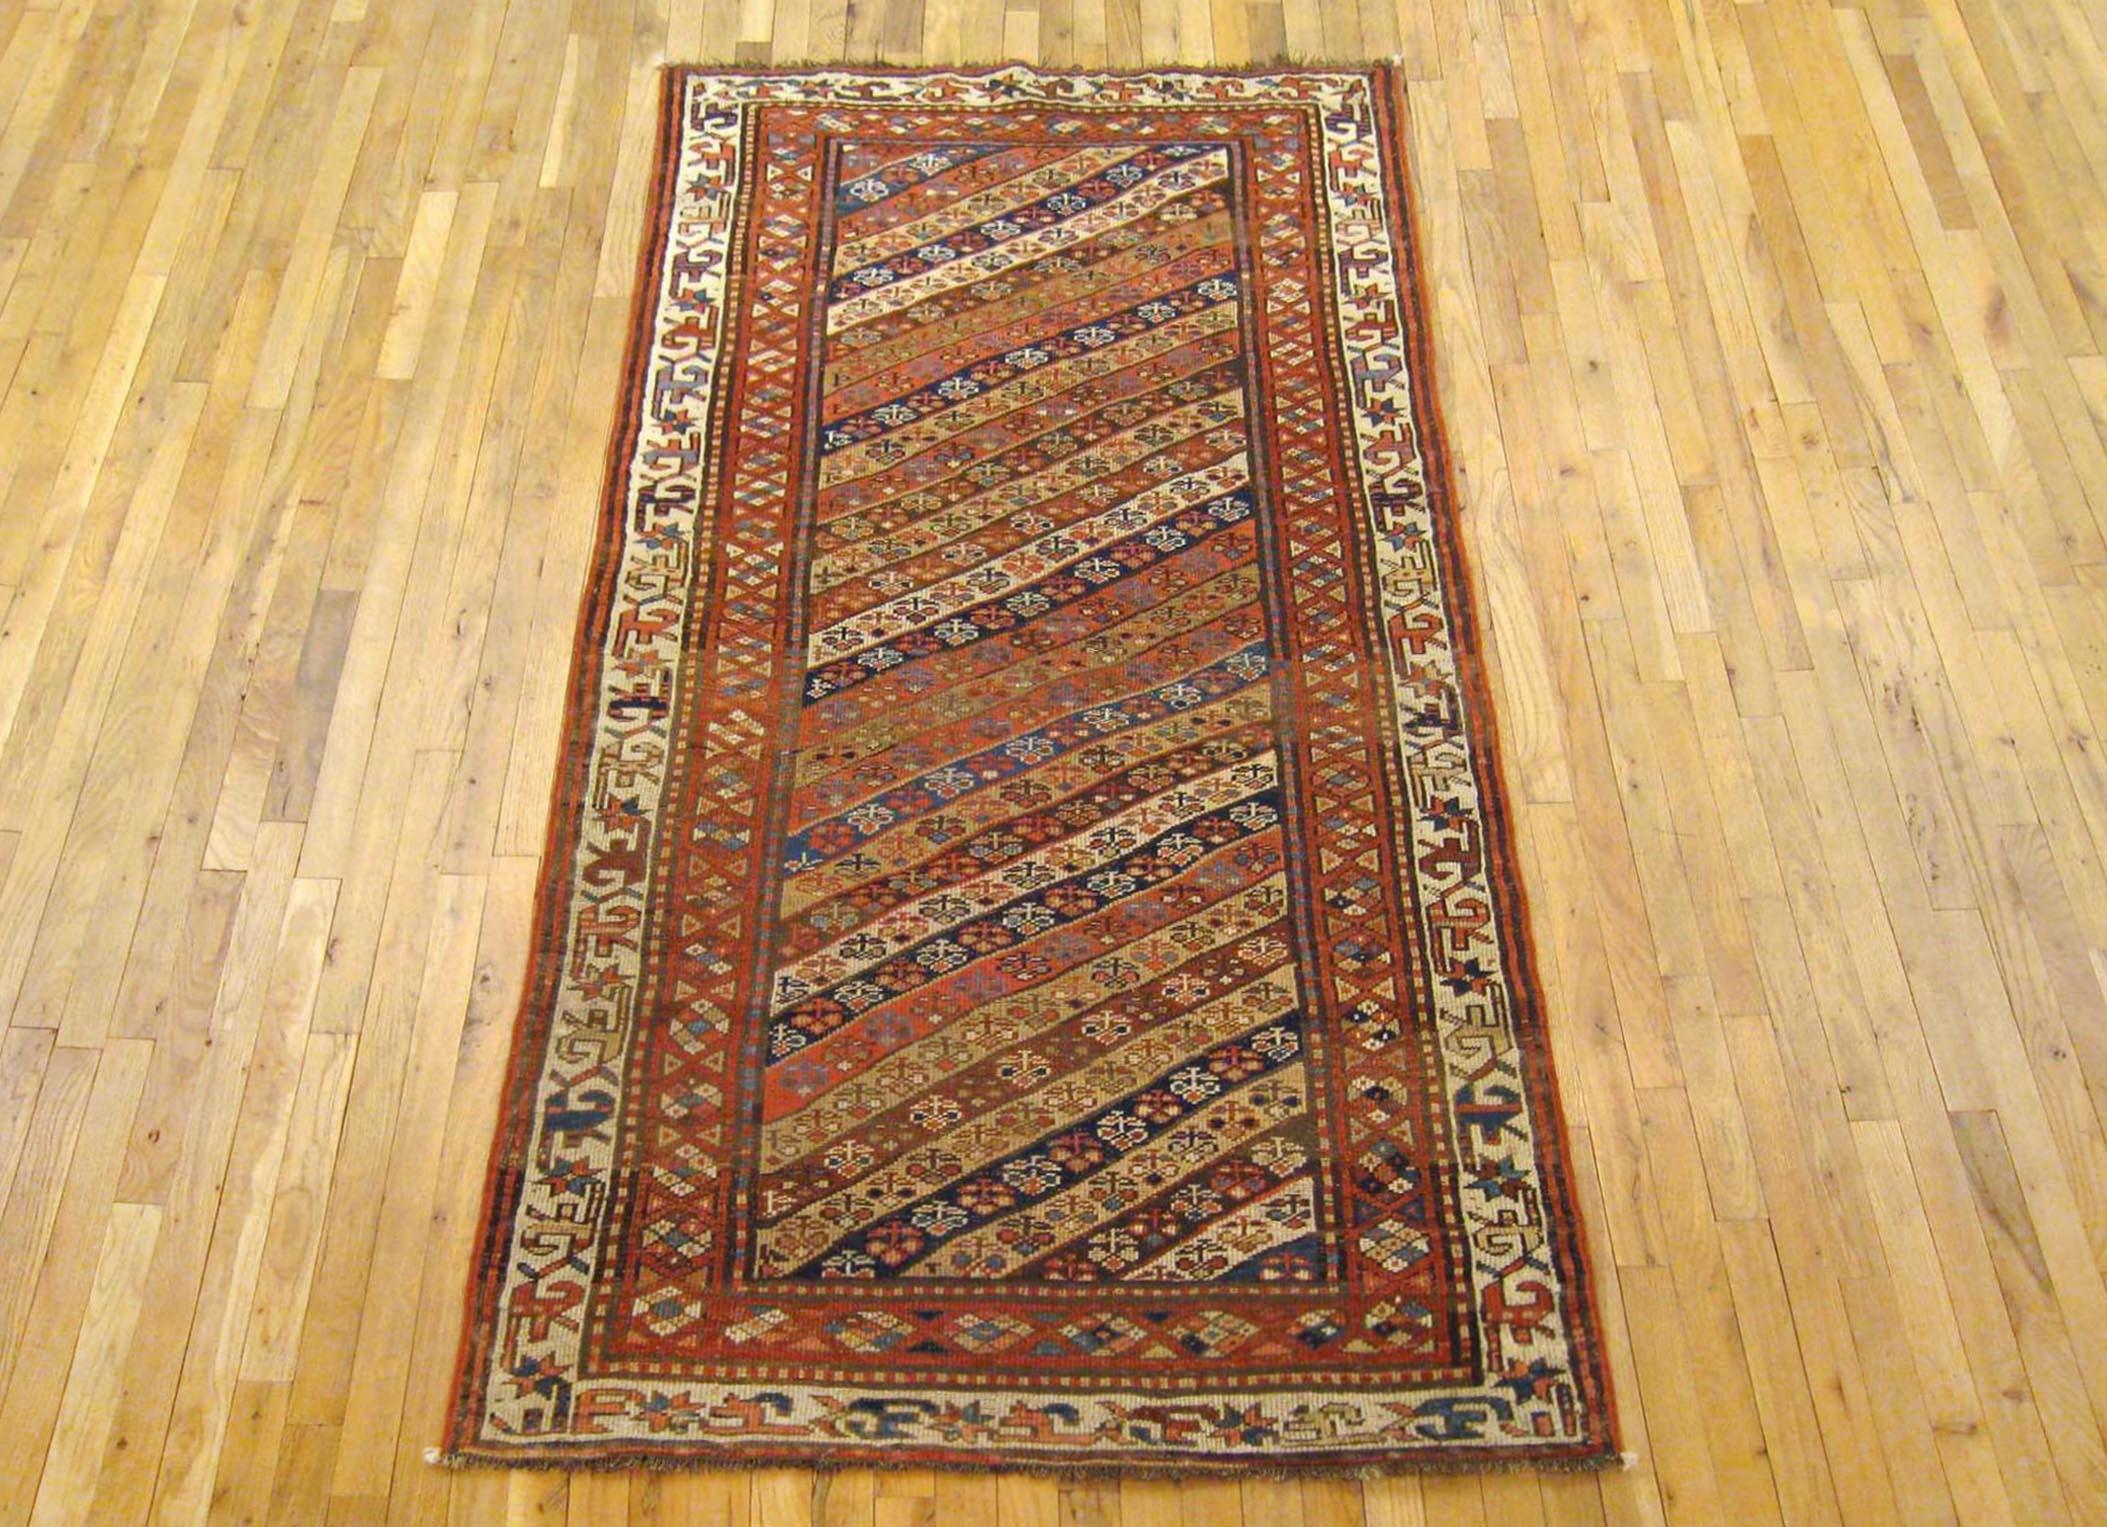 Antique Persian Kurd Rug, Runner size, circa 1900.

A one-of-a-kind antique Persian Kurd Oriental Carpet, hand-knotted with soft wool pile. This rug features diagonal stripes allover the red primary field, within an ivory outer border. In runner